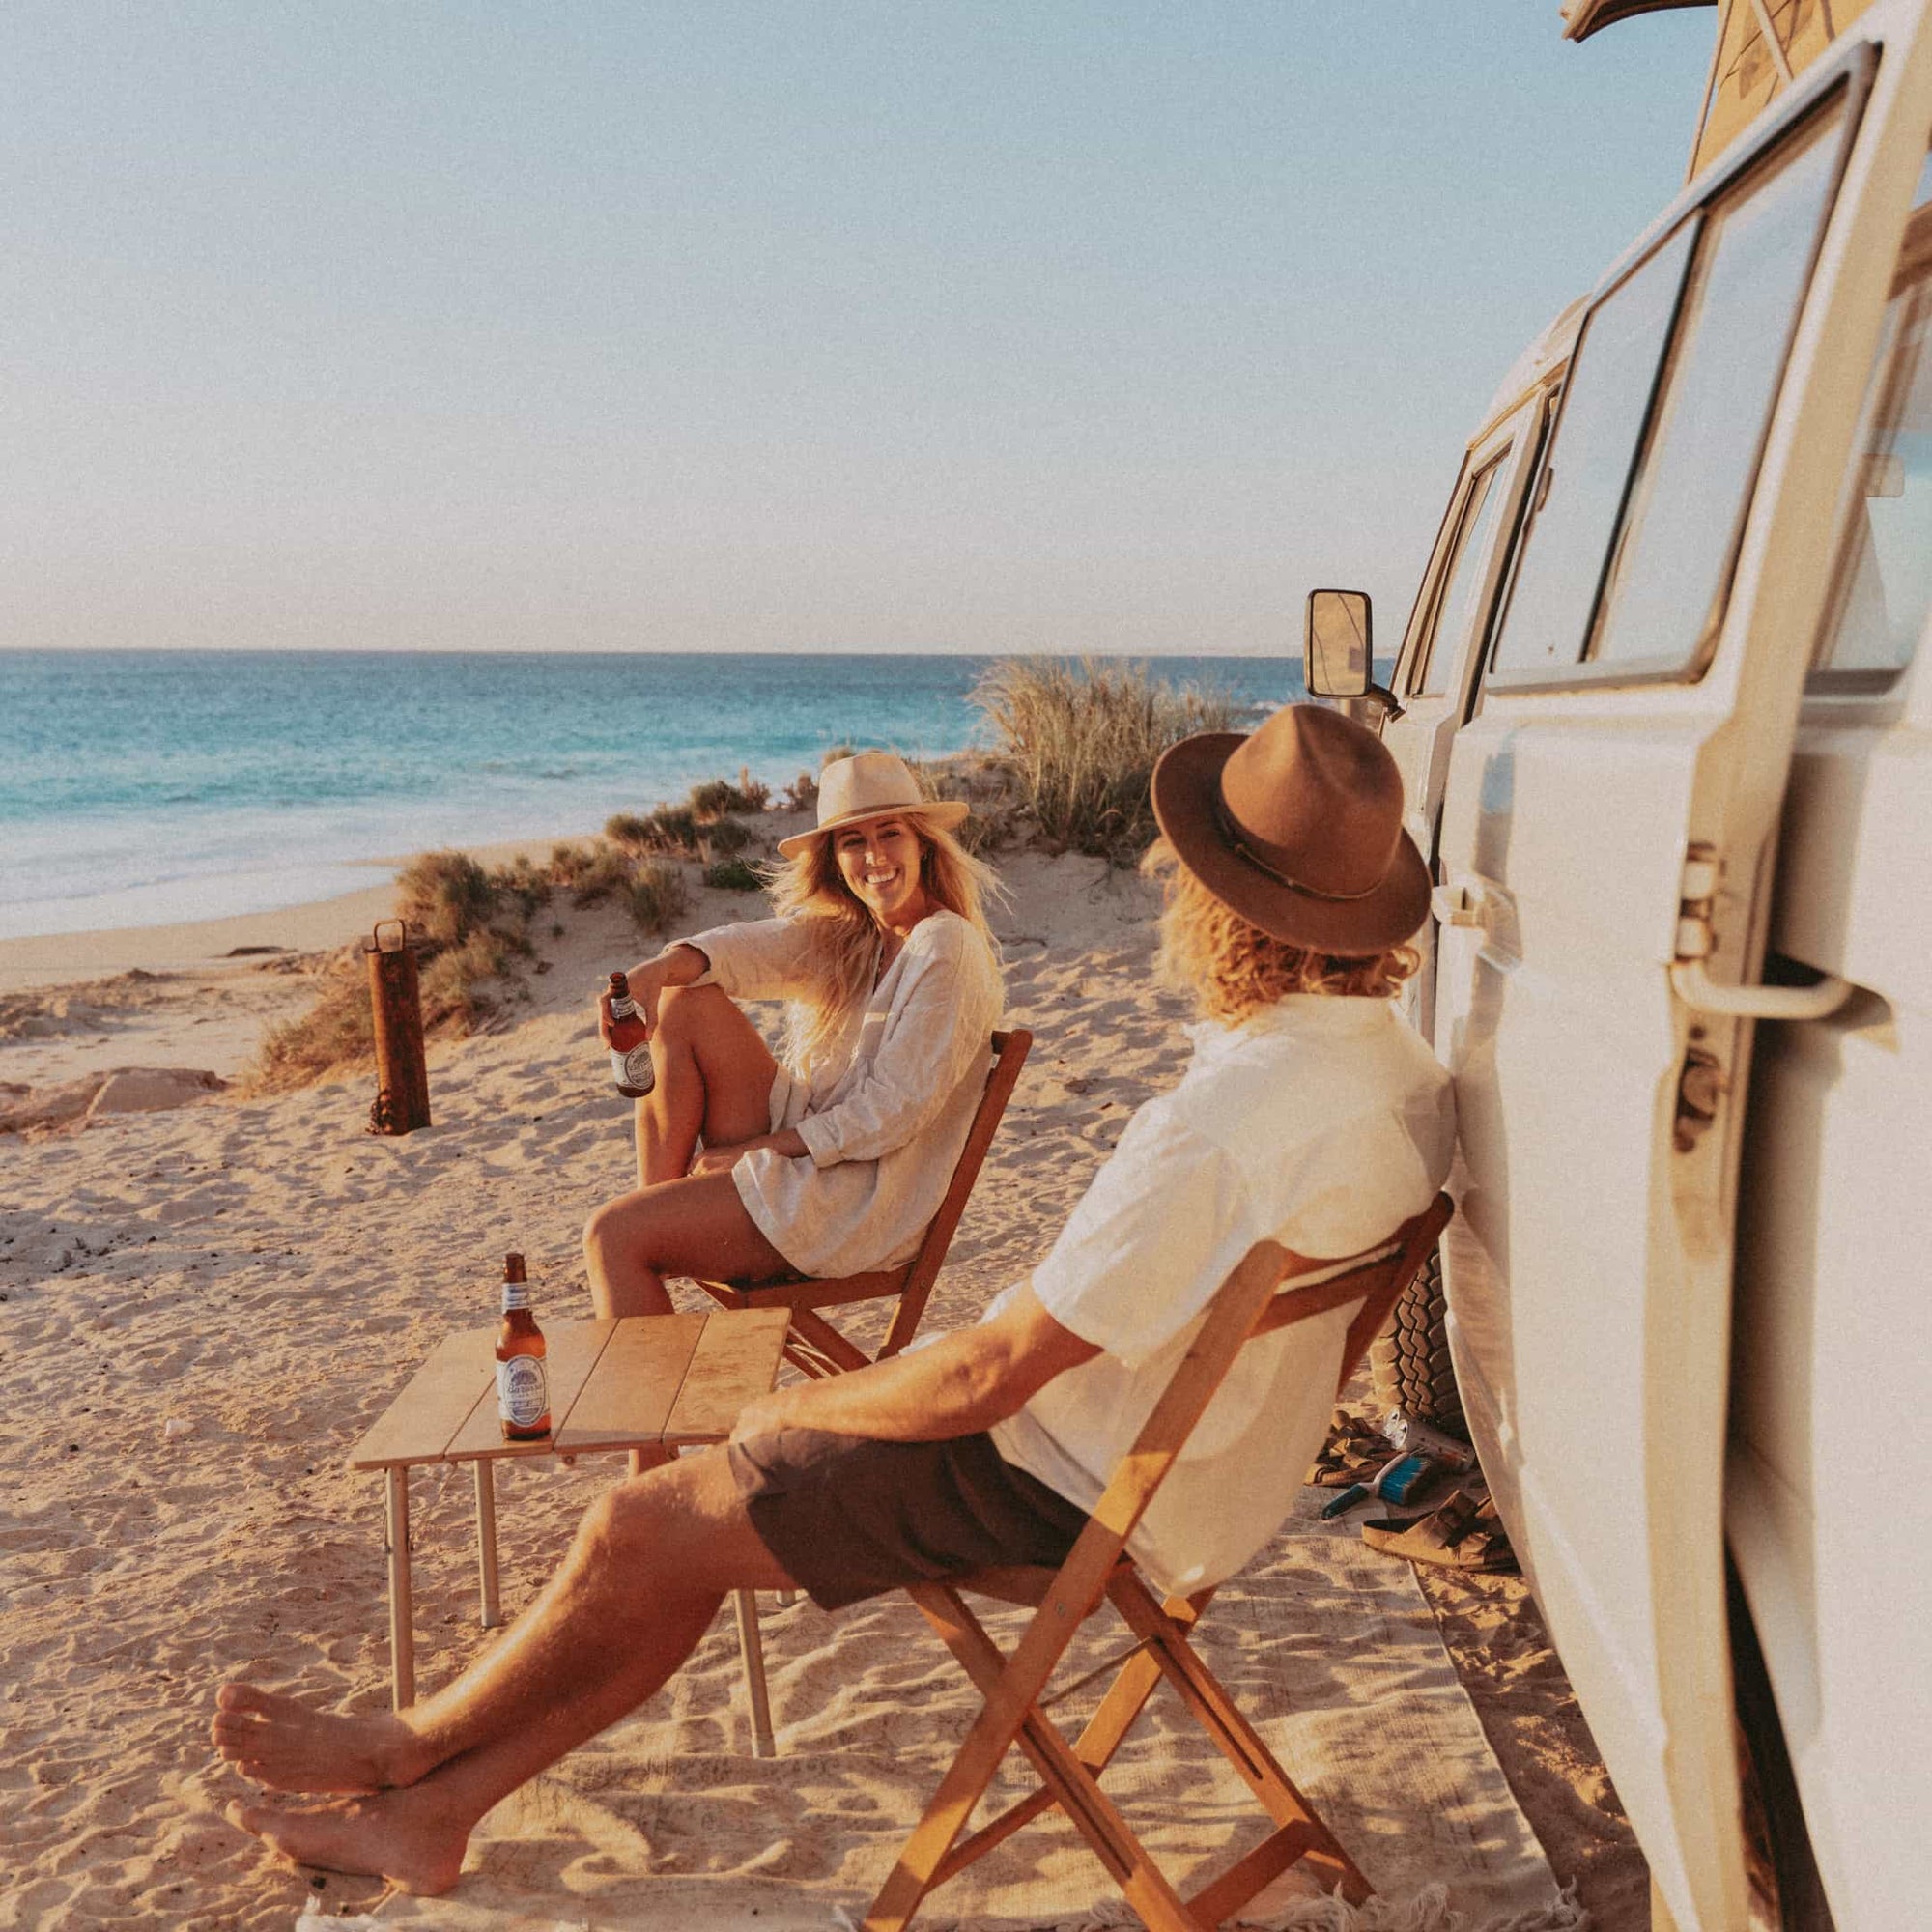 A young couple sit on the beach next to their VW can drinking beers